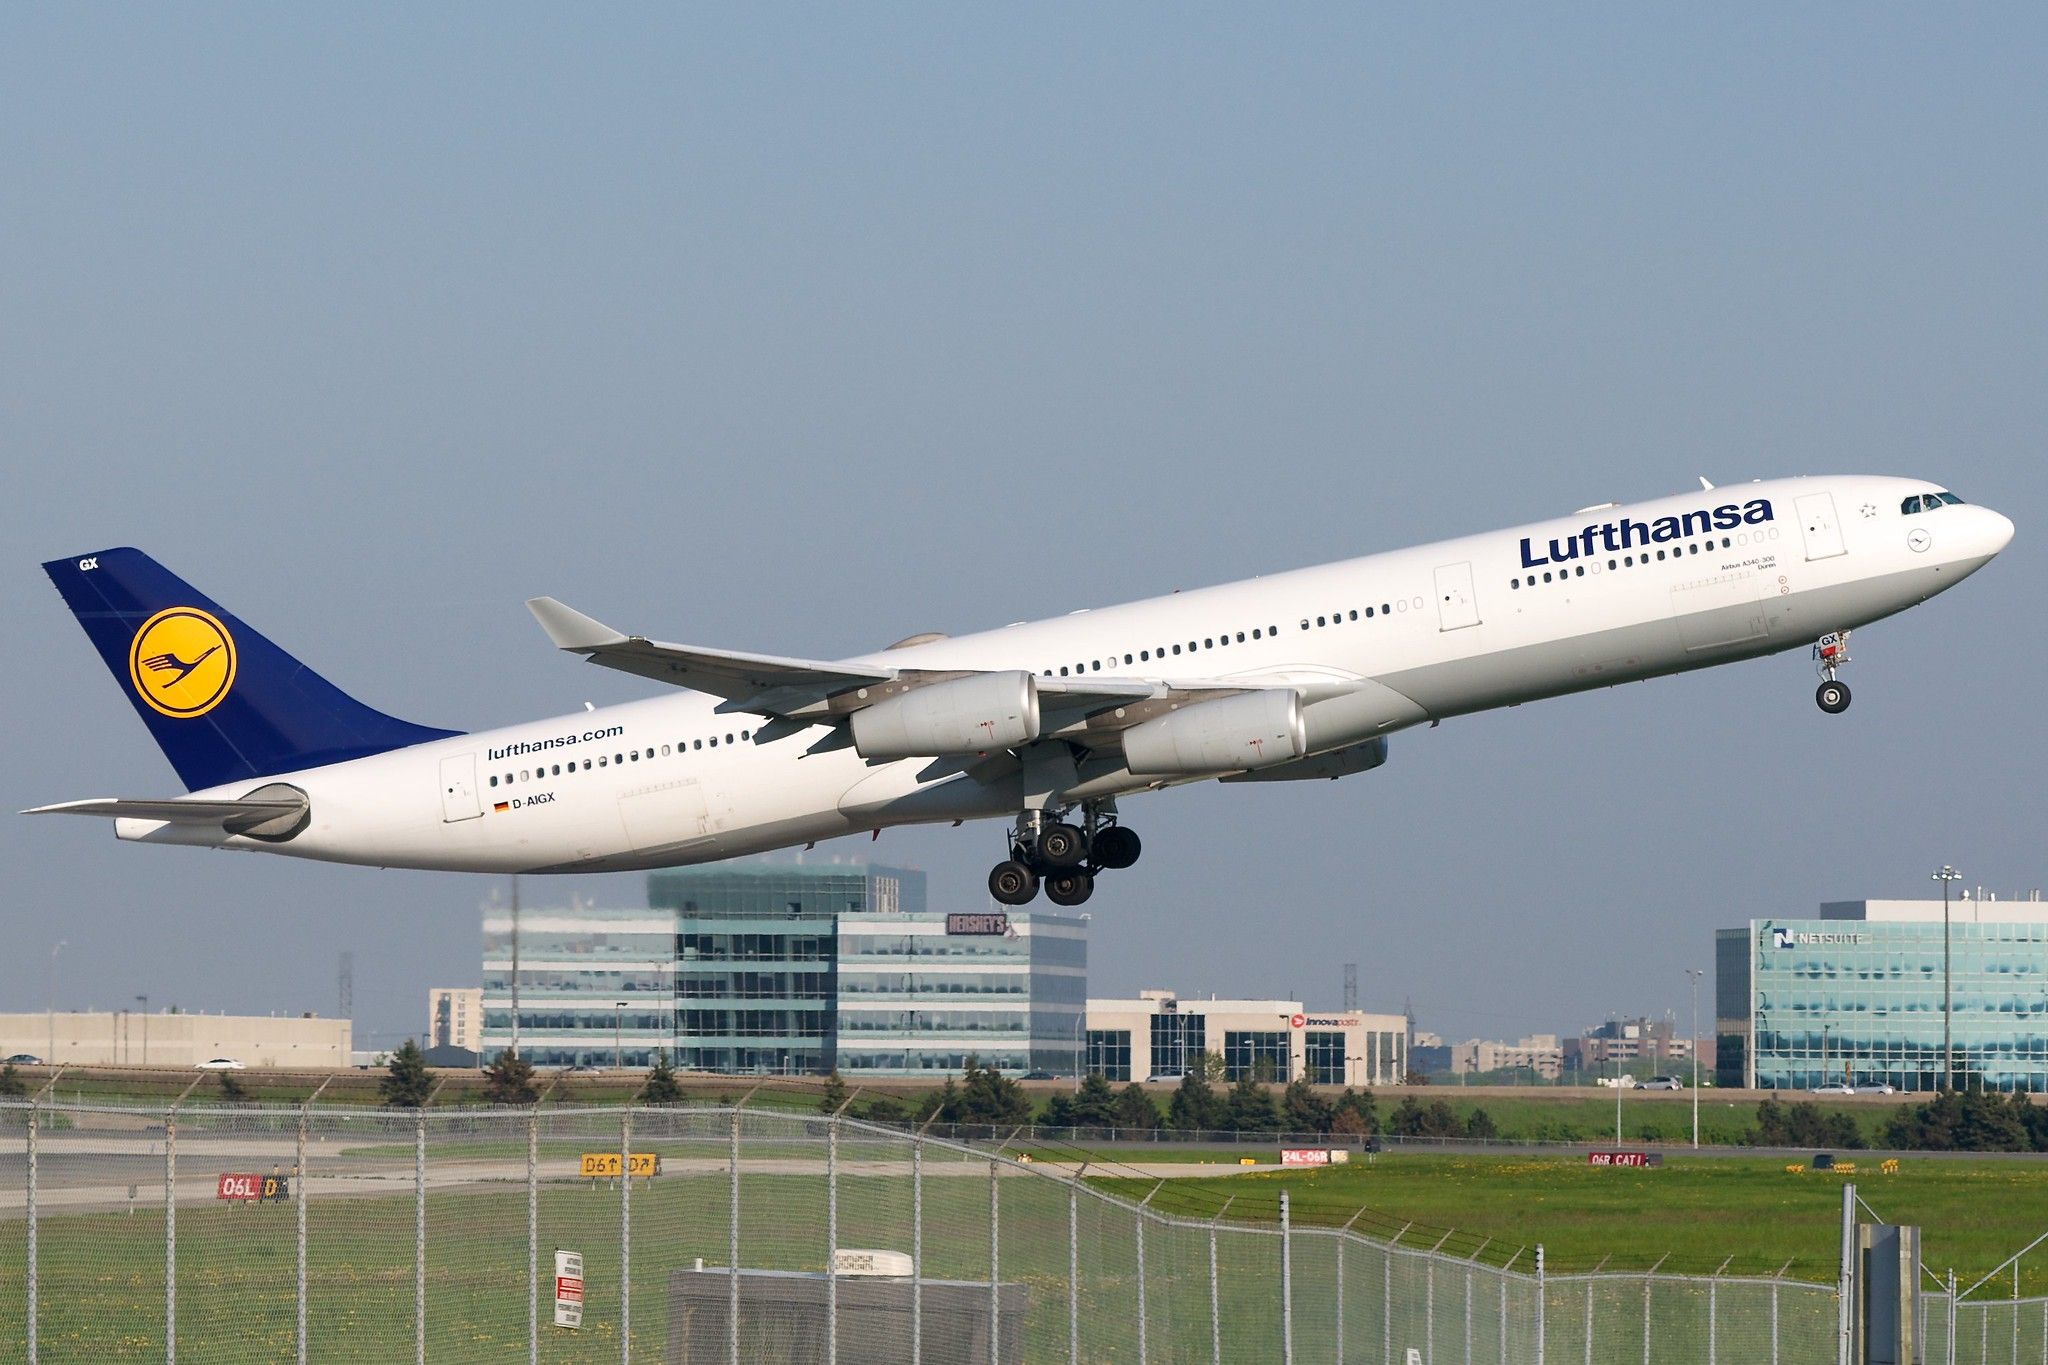 A Lufthansa Airbus A340-300 just after take off.